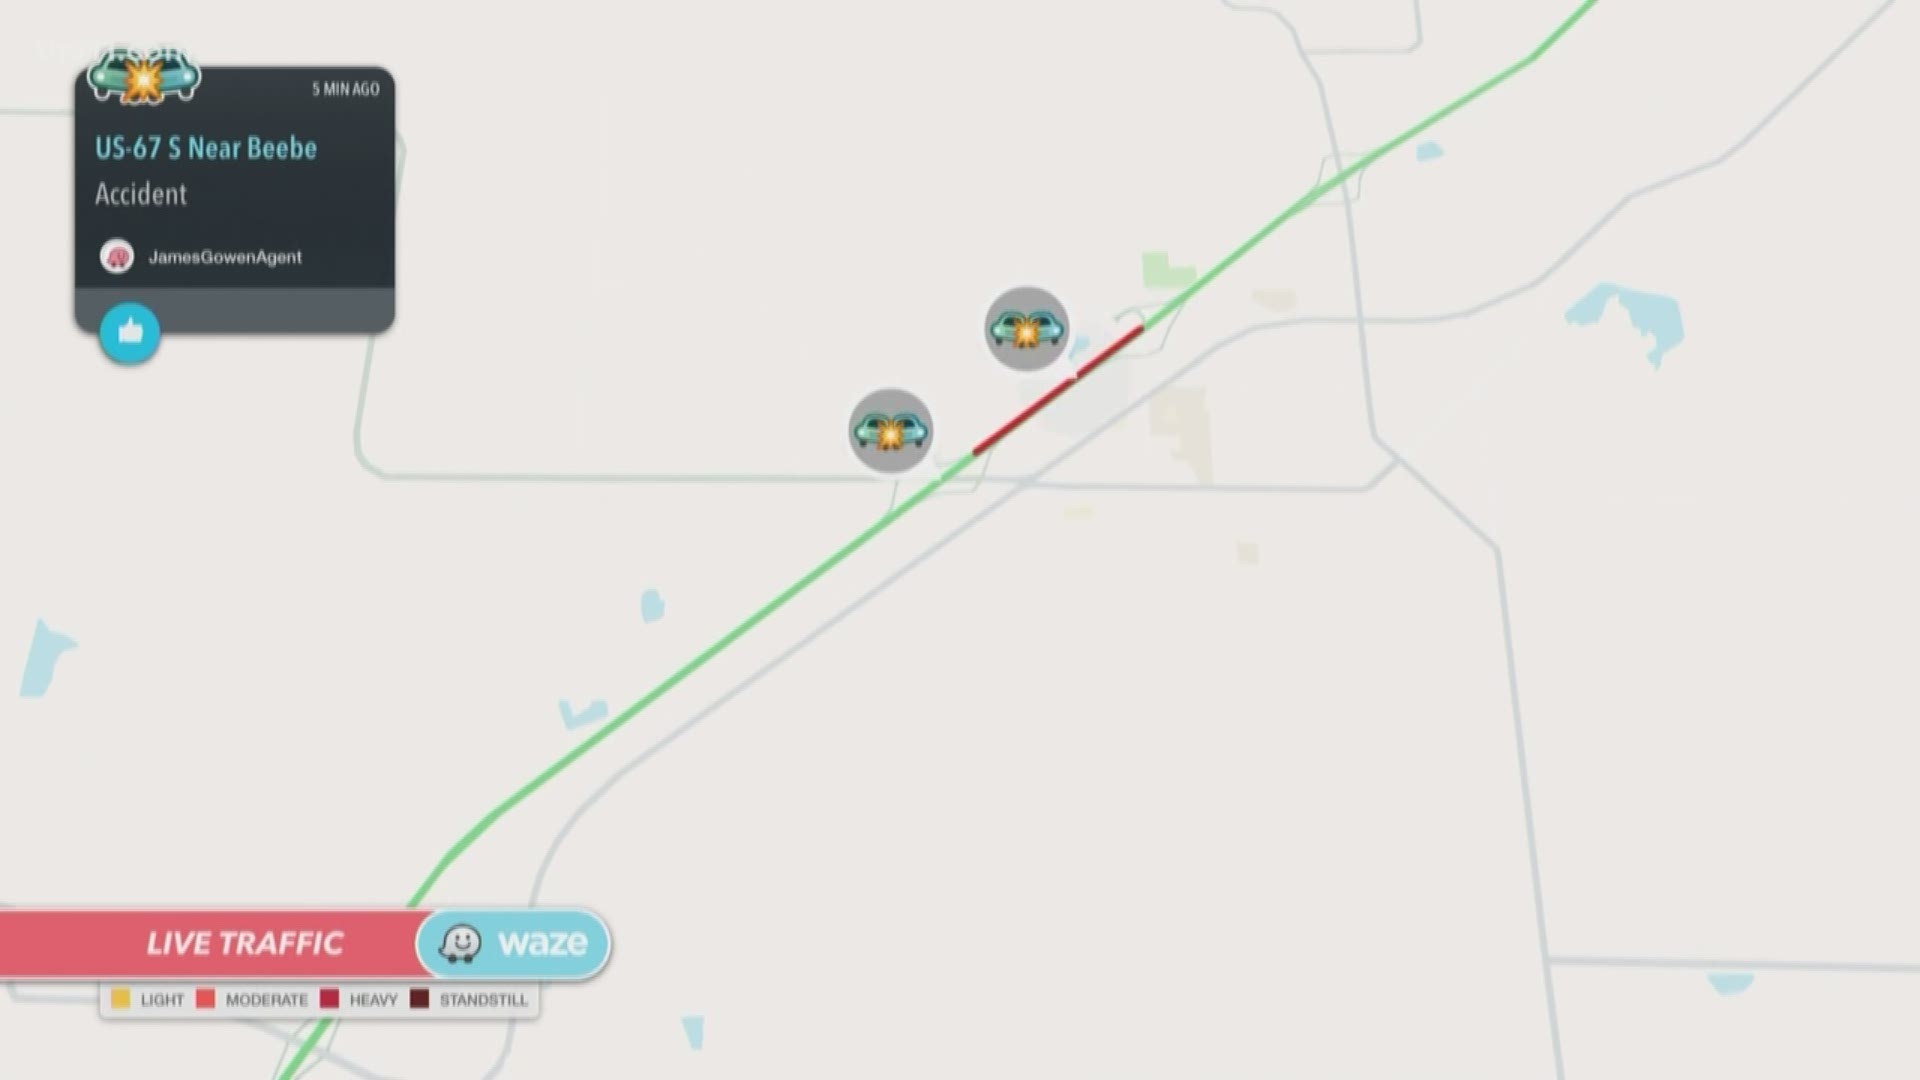 Accident on U.S. Highway 67 SB near 0.5 miles northeast of Exit 22. All lanes remain blocked at this time.